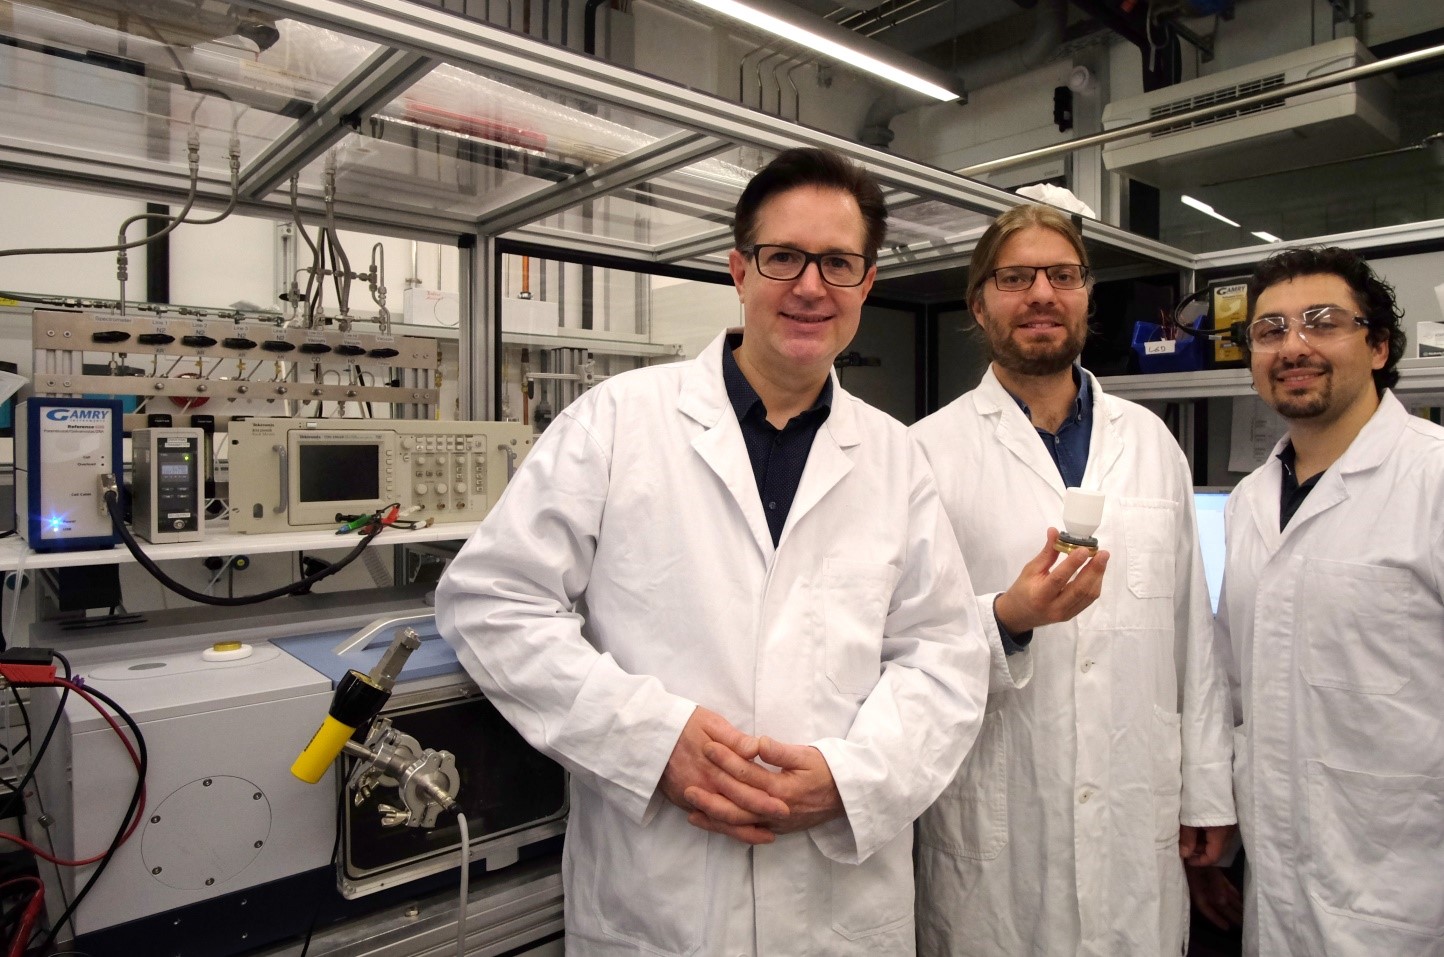 Spectroelectrochemistry laboratory at the Department of Chemistry and Pharmacy, Friedrich-Alexander-Universität Erlangen-Nürnberg. From right to left: Prof. Dr. Jörg Libuda, Dr. Olaf Brummel presenting an infrared spectroscopy cell, and Firas Faisal (PhD student).